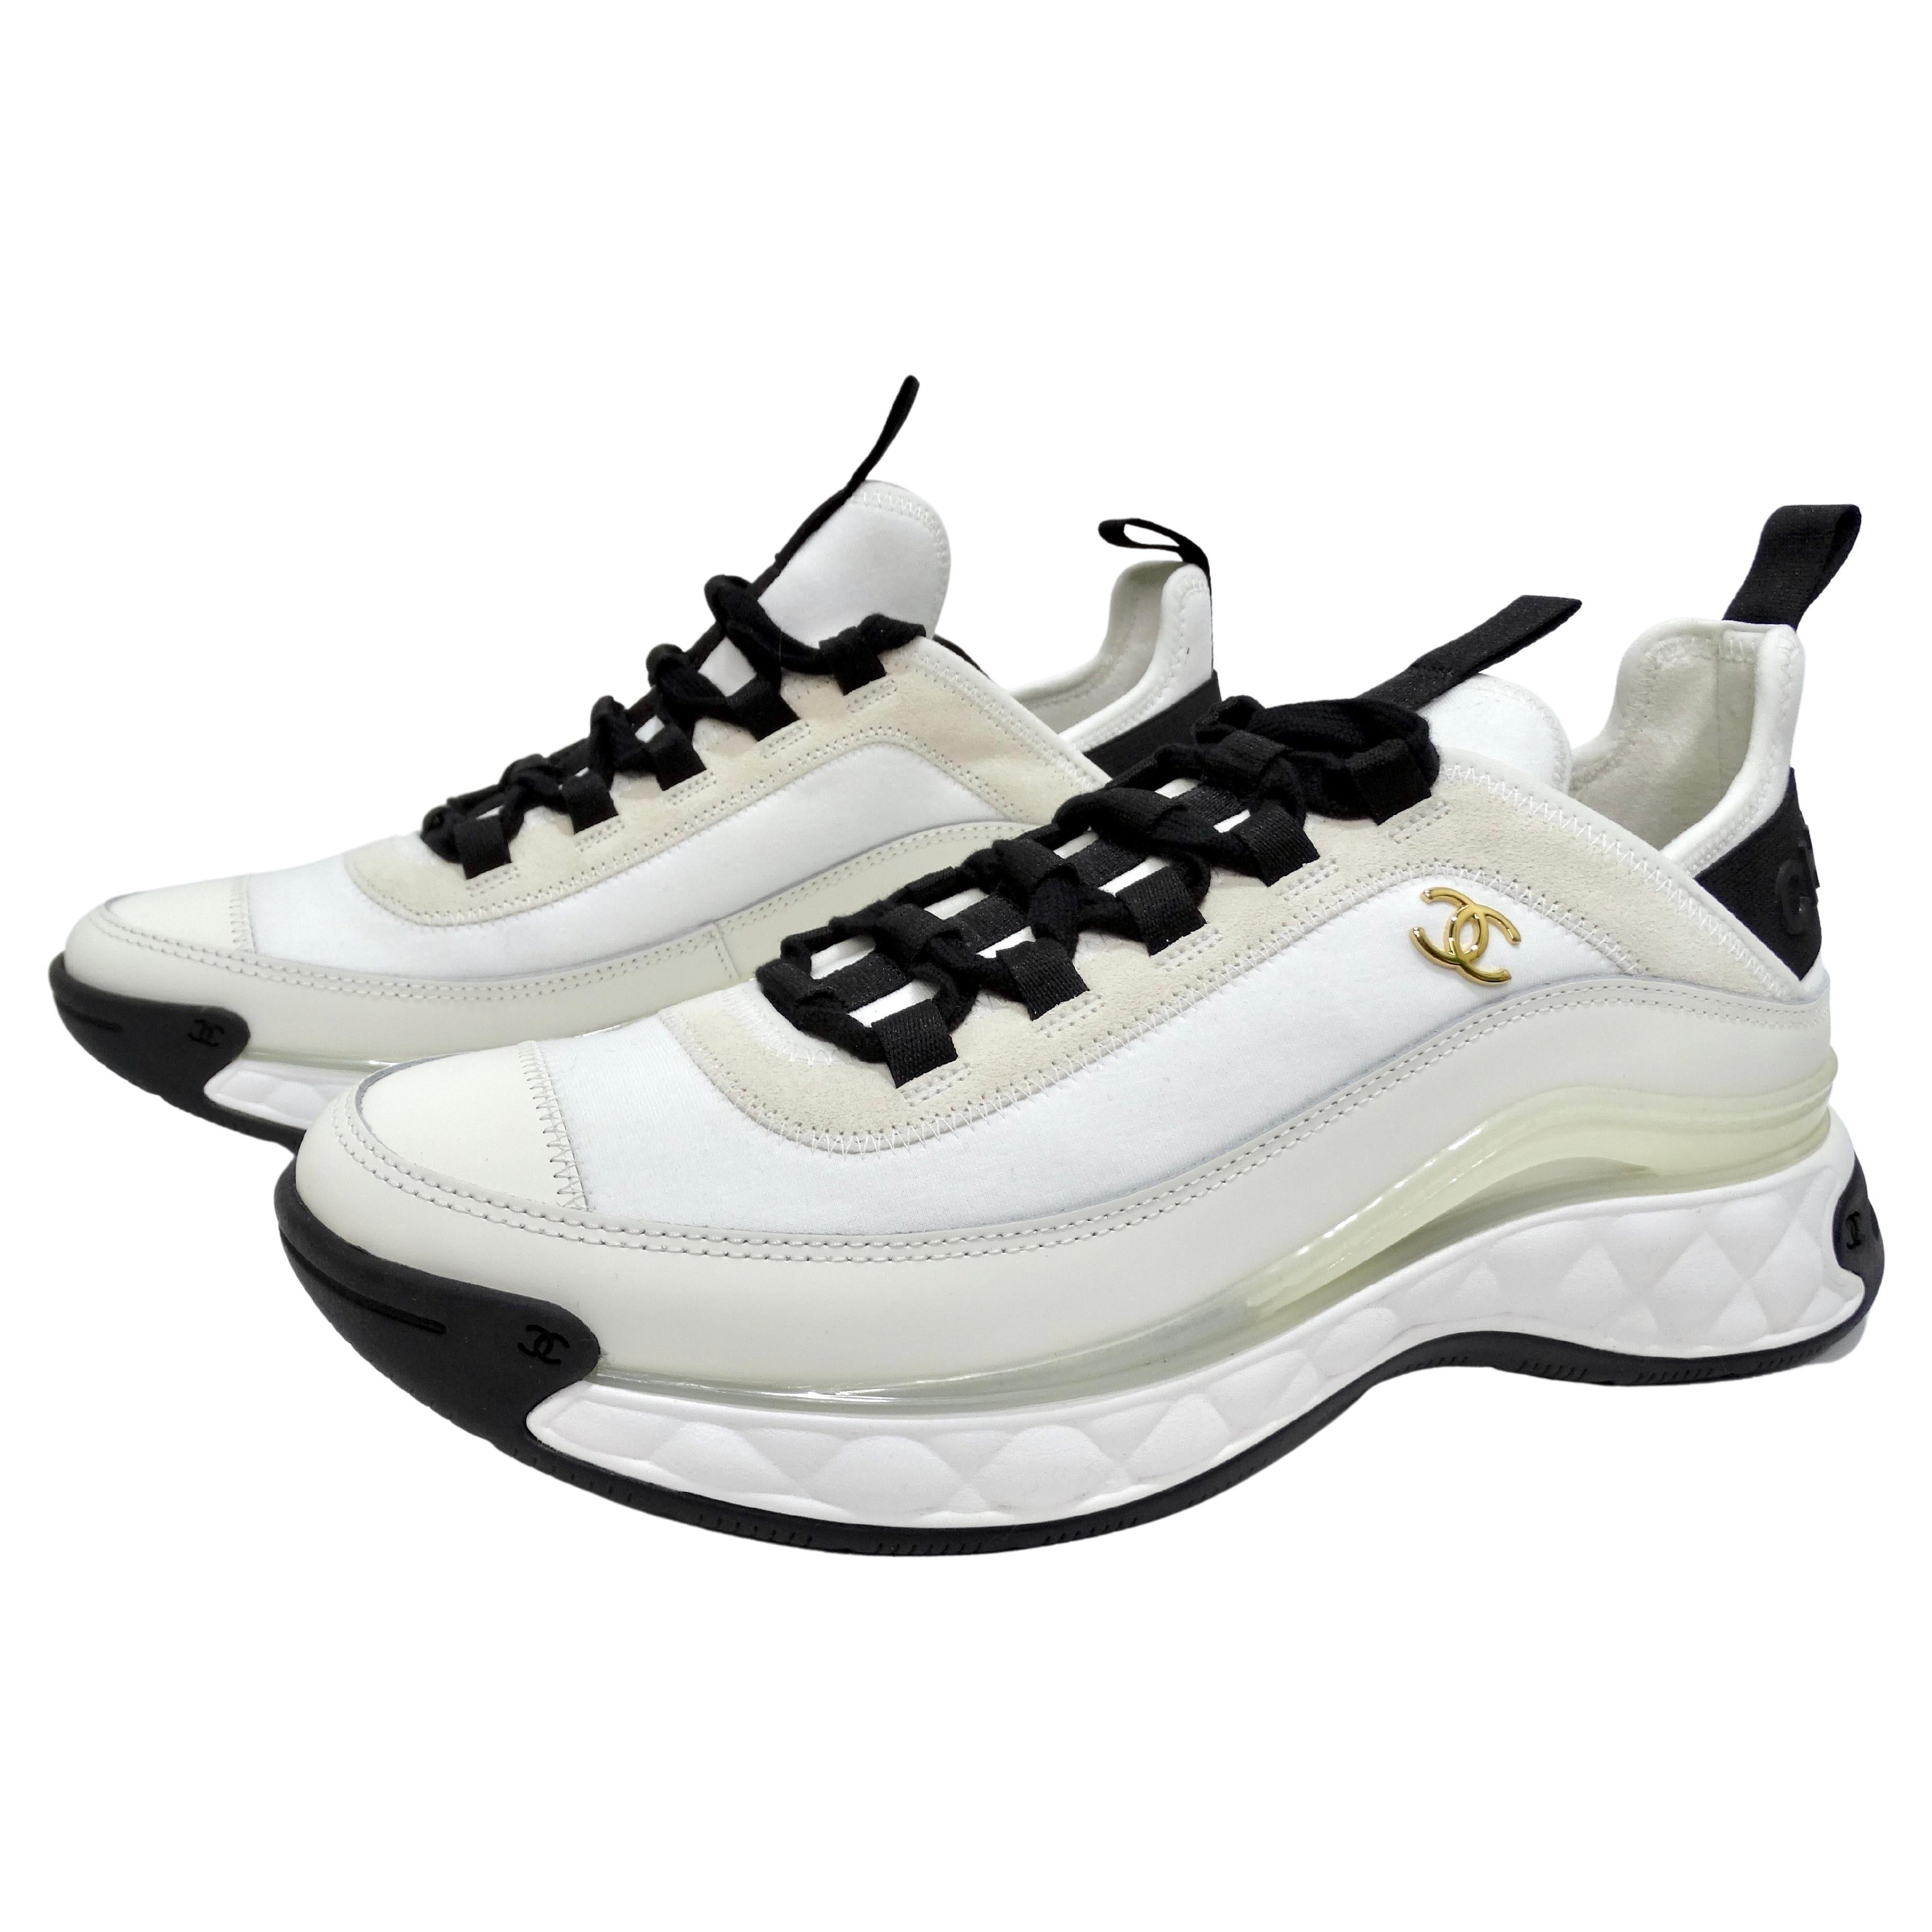 Chanel Mixed Fibers CC Sneakers 39.5 Ivory Black